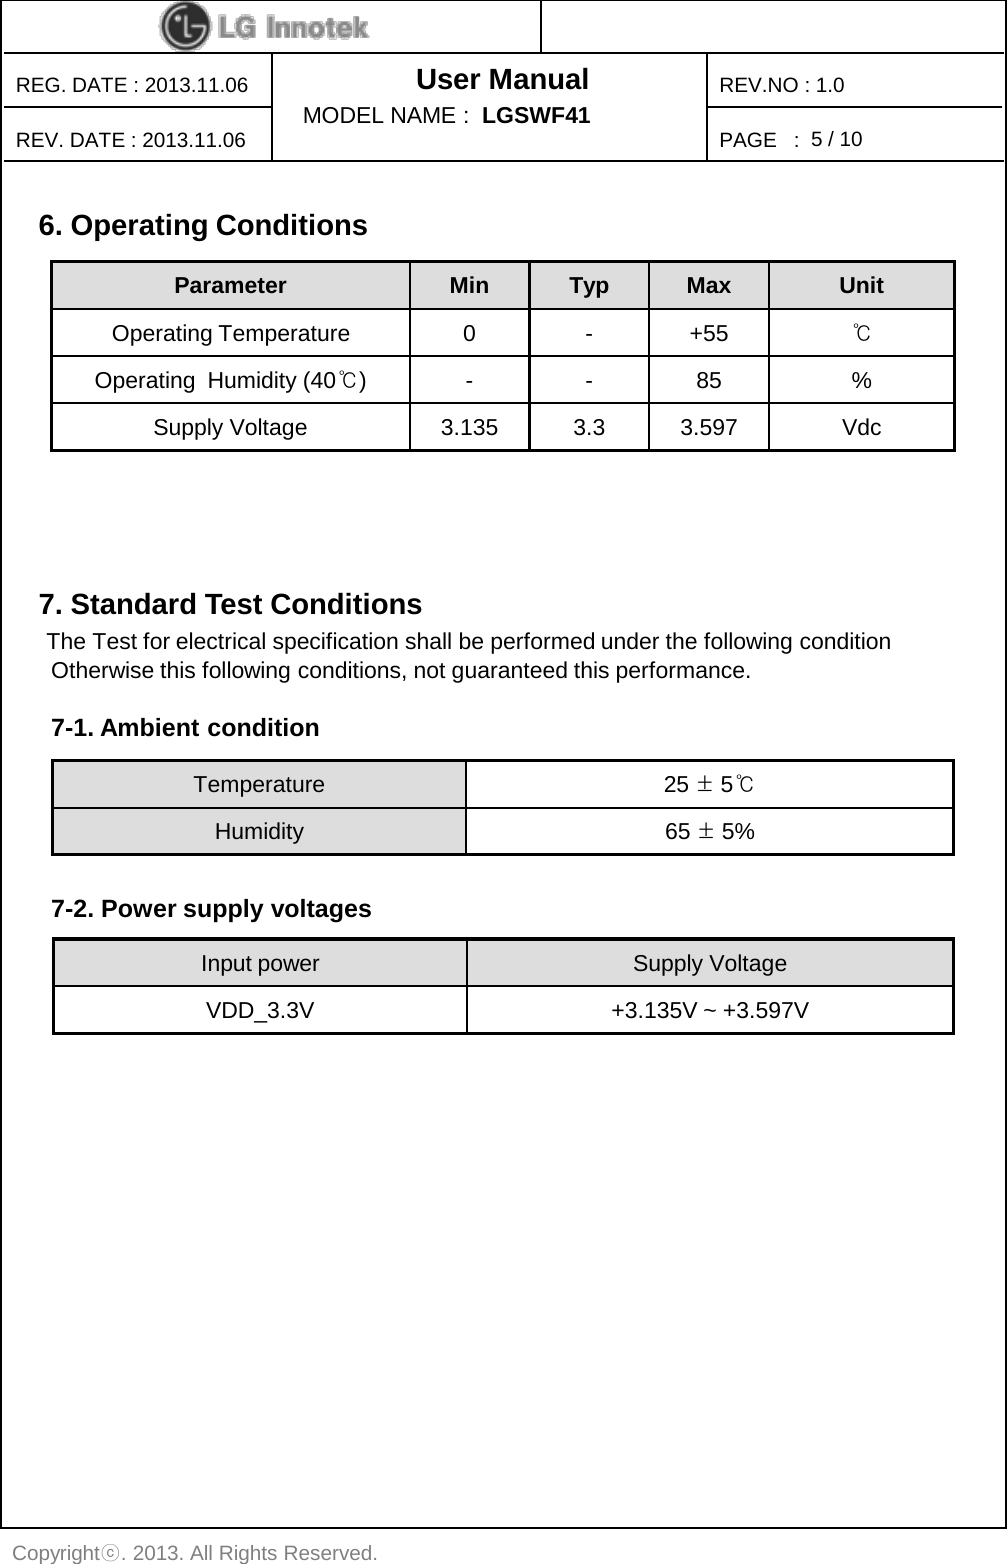 User Manual PAGE   : REG. DATE : 2013.11.06 REV. DATE : 2013.11.06 REV.NO : 1.0 Copyrightⓒ. 2013. All Rights Reserved. MODEL NAME :  LGSWF41 5 / 10 6. Operating Conditions    Parameter Min Typ Max Unit Operating Temperature  0  -  +55 ℃ Operating  Humidity (40℃)  -  -  85  % Supply Voltage 3.135 3.3 3.597 Vdc 7. Standard Test Conditions  The Test for electrical specification shall be performed under the following condition   Otherwise this following conditions, not guaranteed this performance. Temperature 25 ± 5℃ Humidity 65 ± 5% Input power Supply Voltage VDD_3.3V +3.135V ~ +3.597V  7-1. Ambient condition  7-2. Power supply voltages 